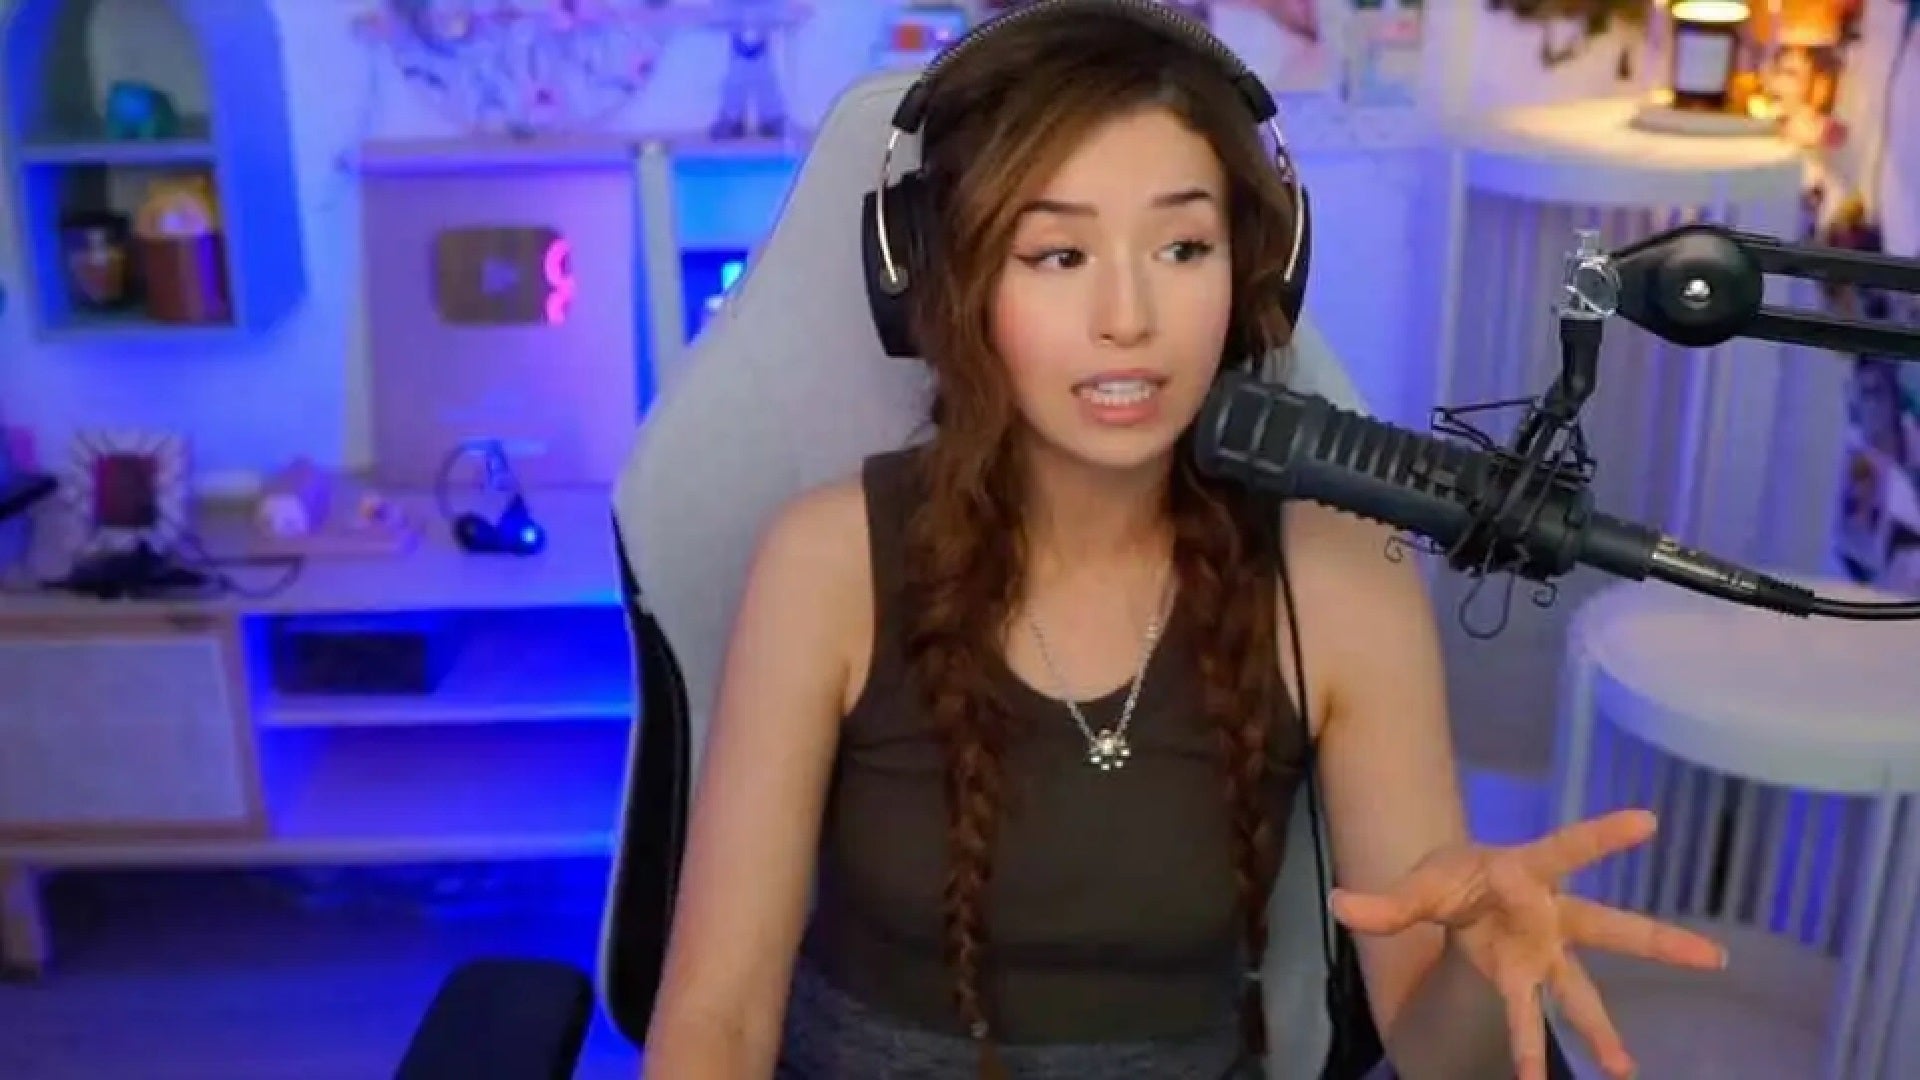 In a December 2022 stream <strong>Pokimane announced</strong> she had plans to combat revenge porn.